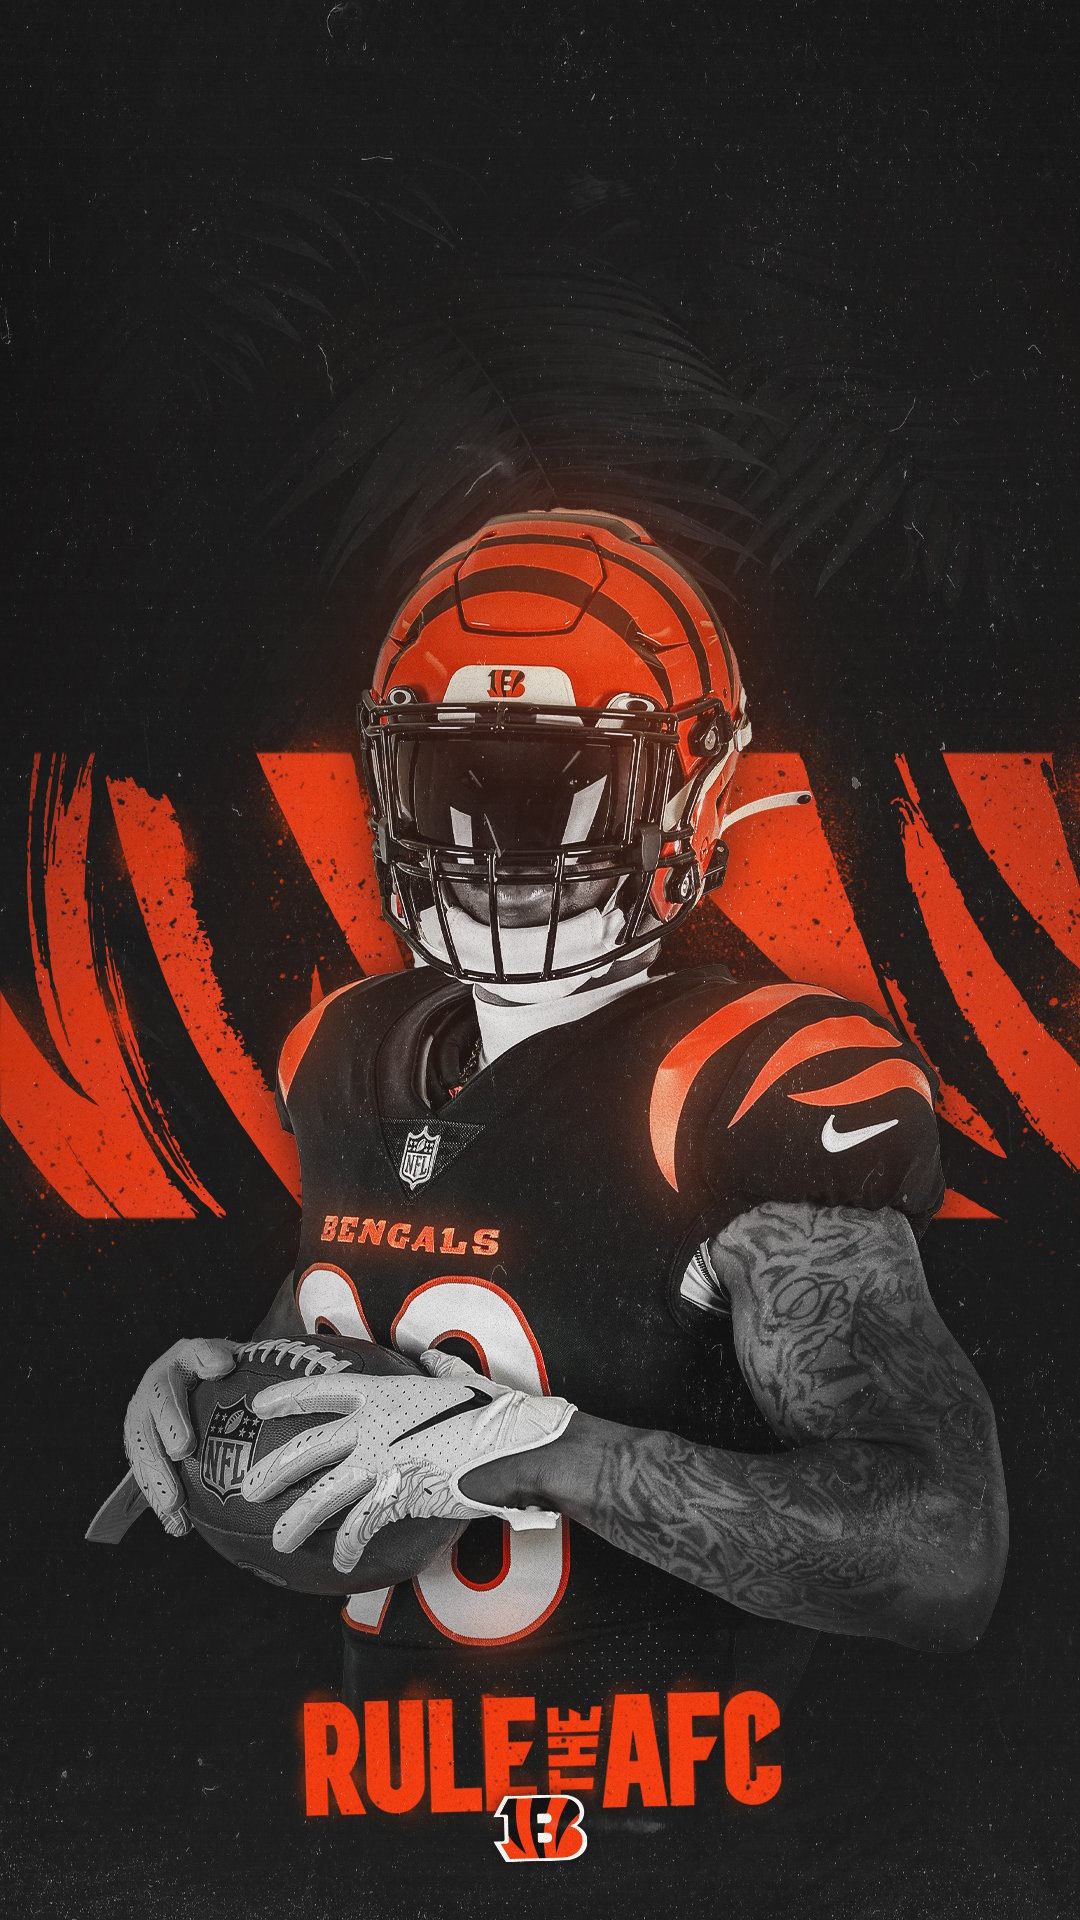 Cincinnati Bengals got you some new wallpaper for the AFC Championship Game. ⤵